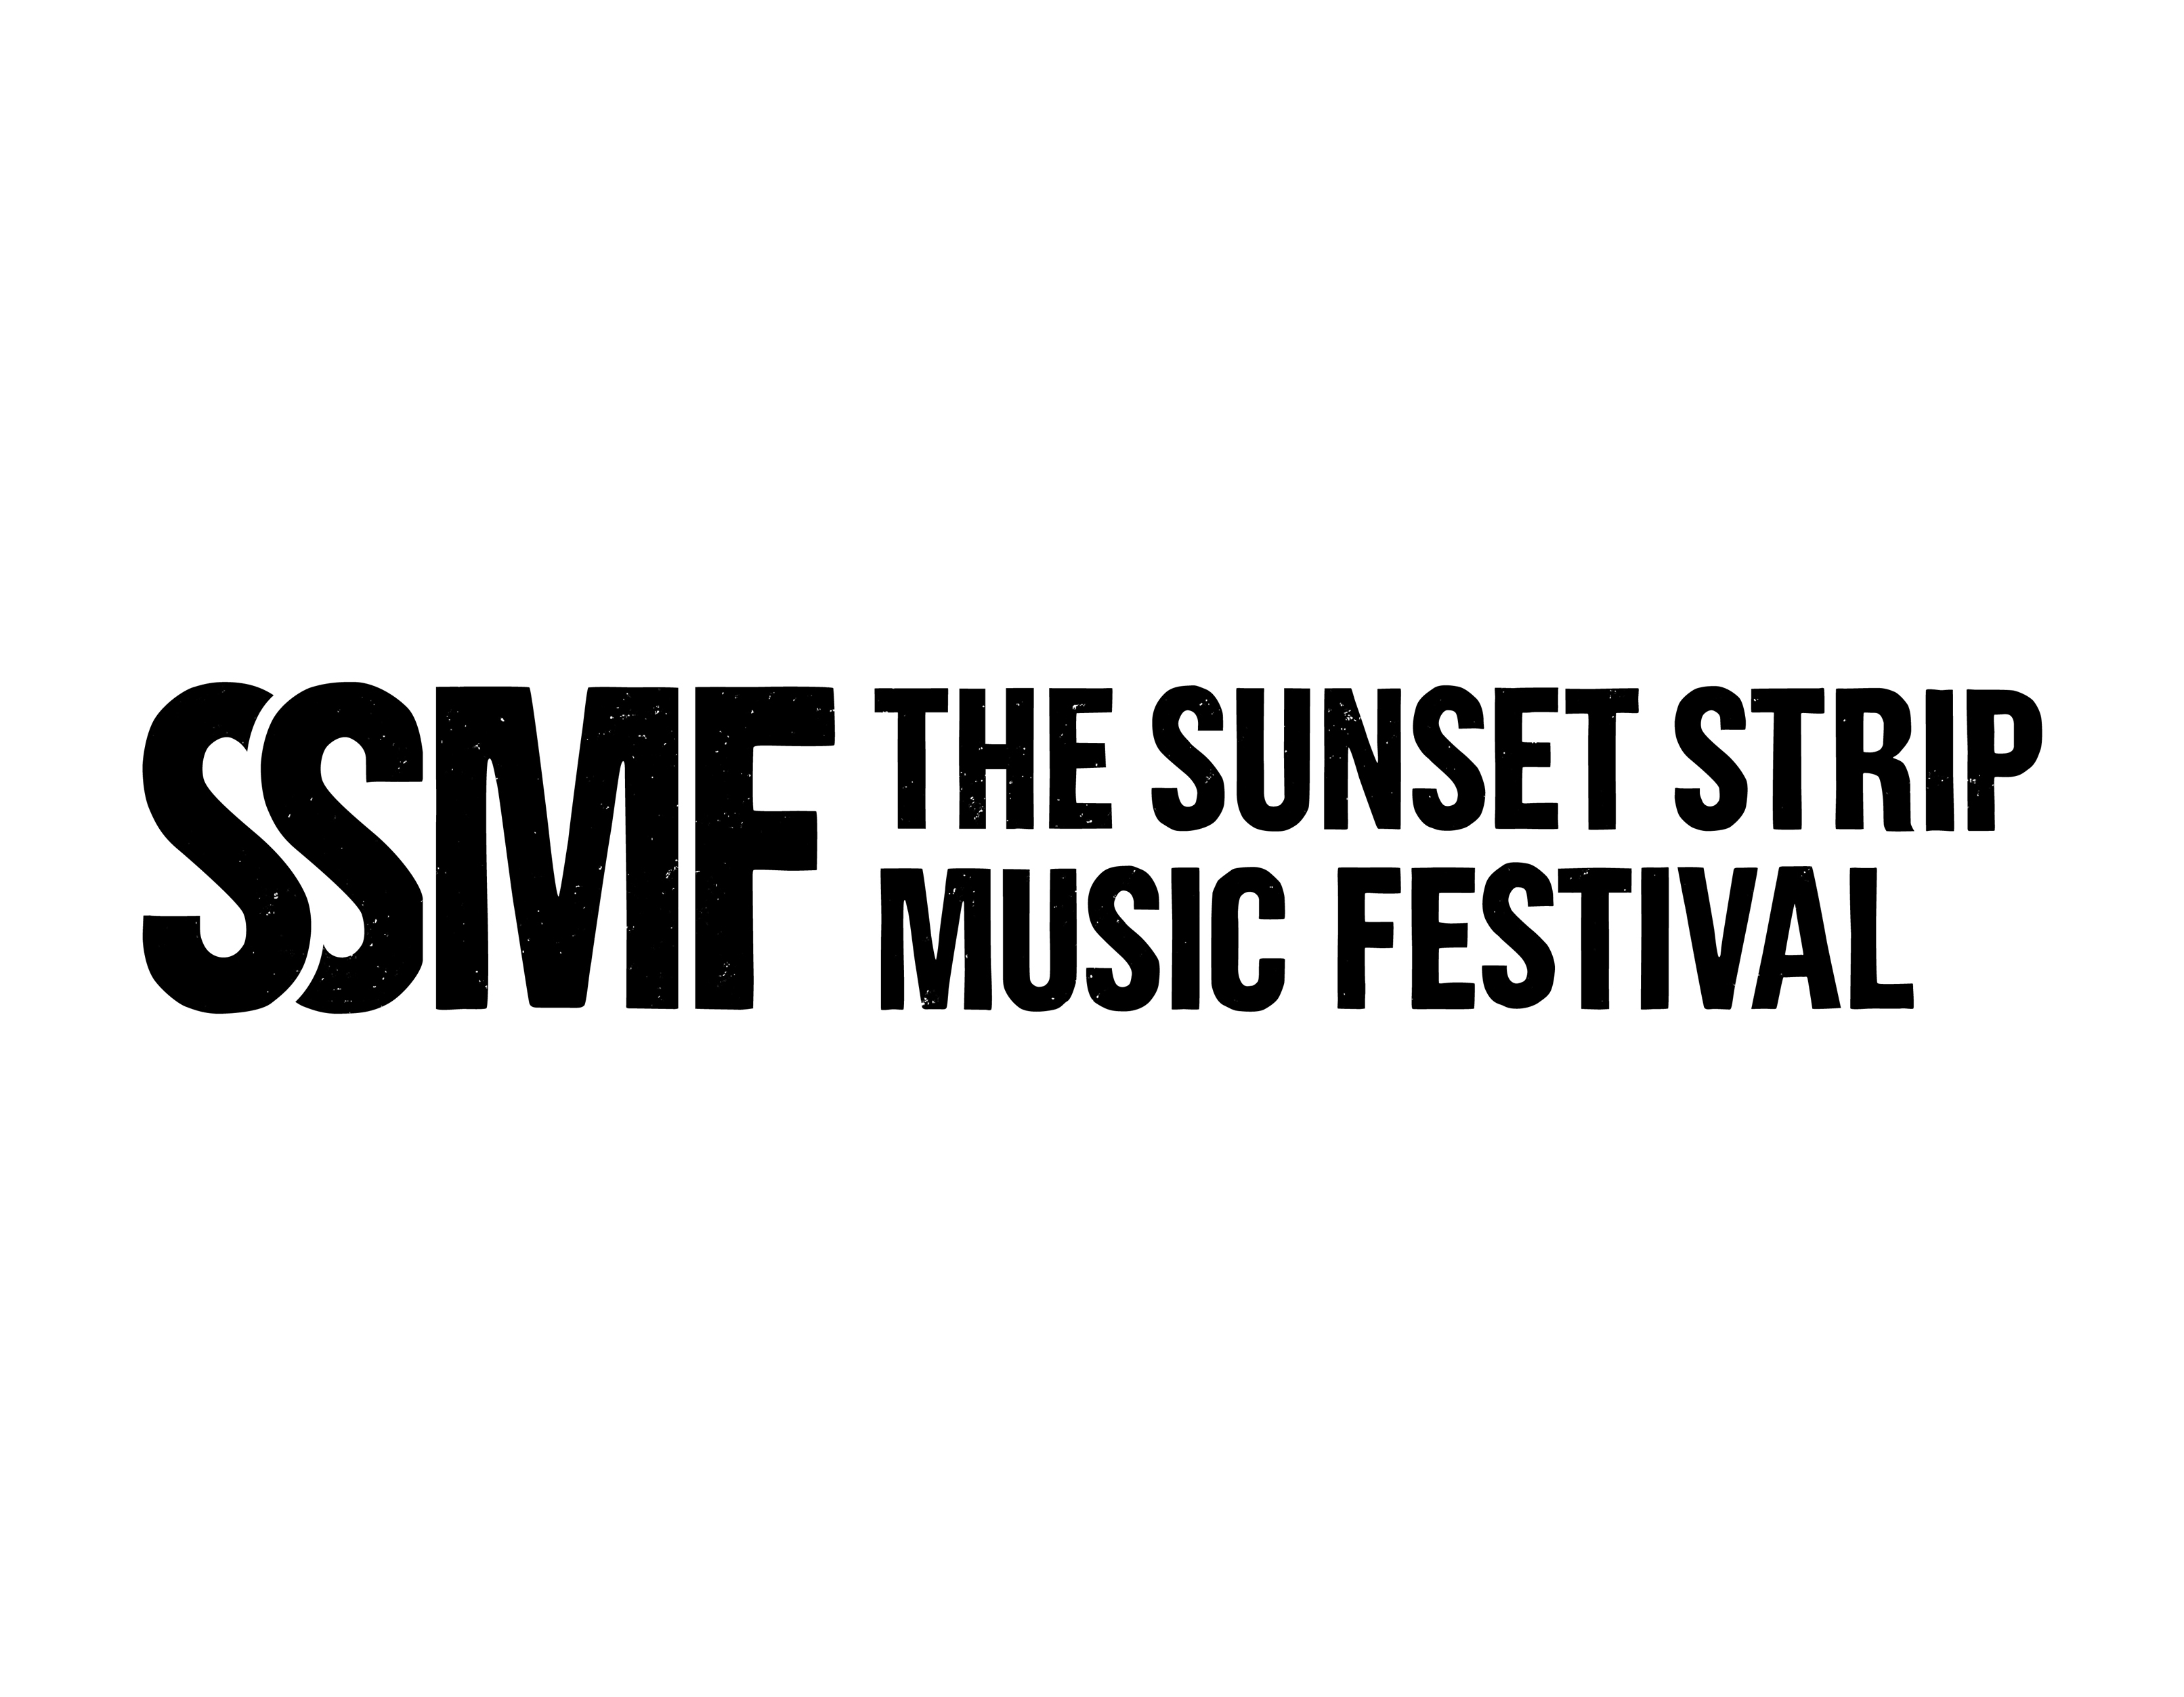 SSMF 2009 Set For Sept. 10-12, Ozzy Osbourne To Be Honored